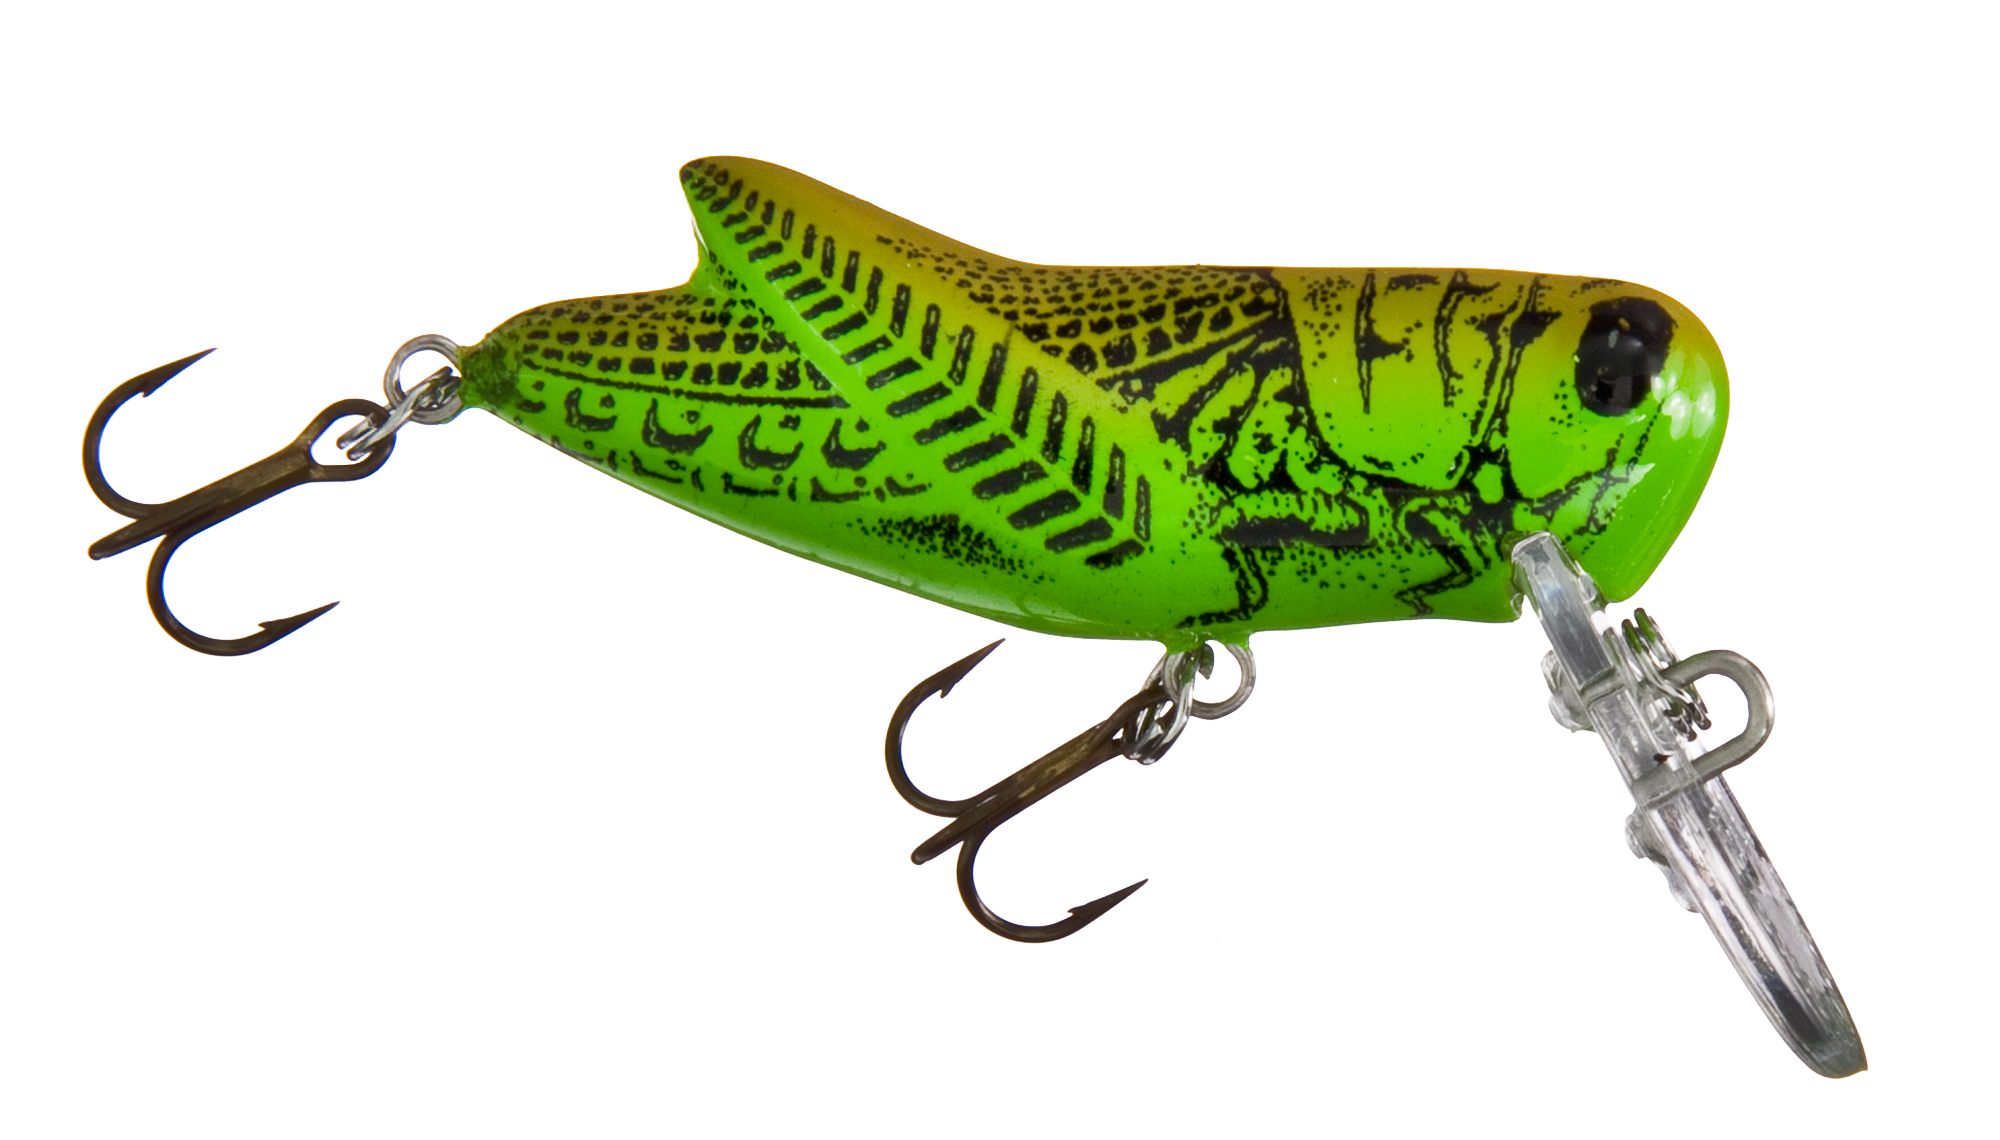 Fishing lure review: Rebel's Teeny Pop-R a bite-sized treat for bass